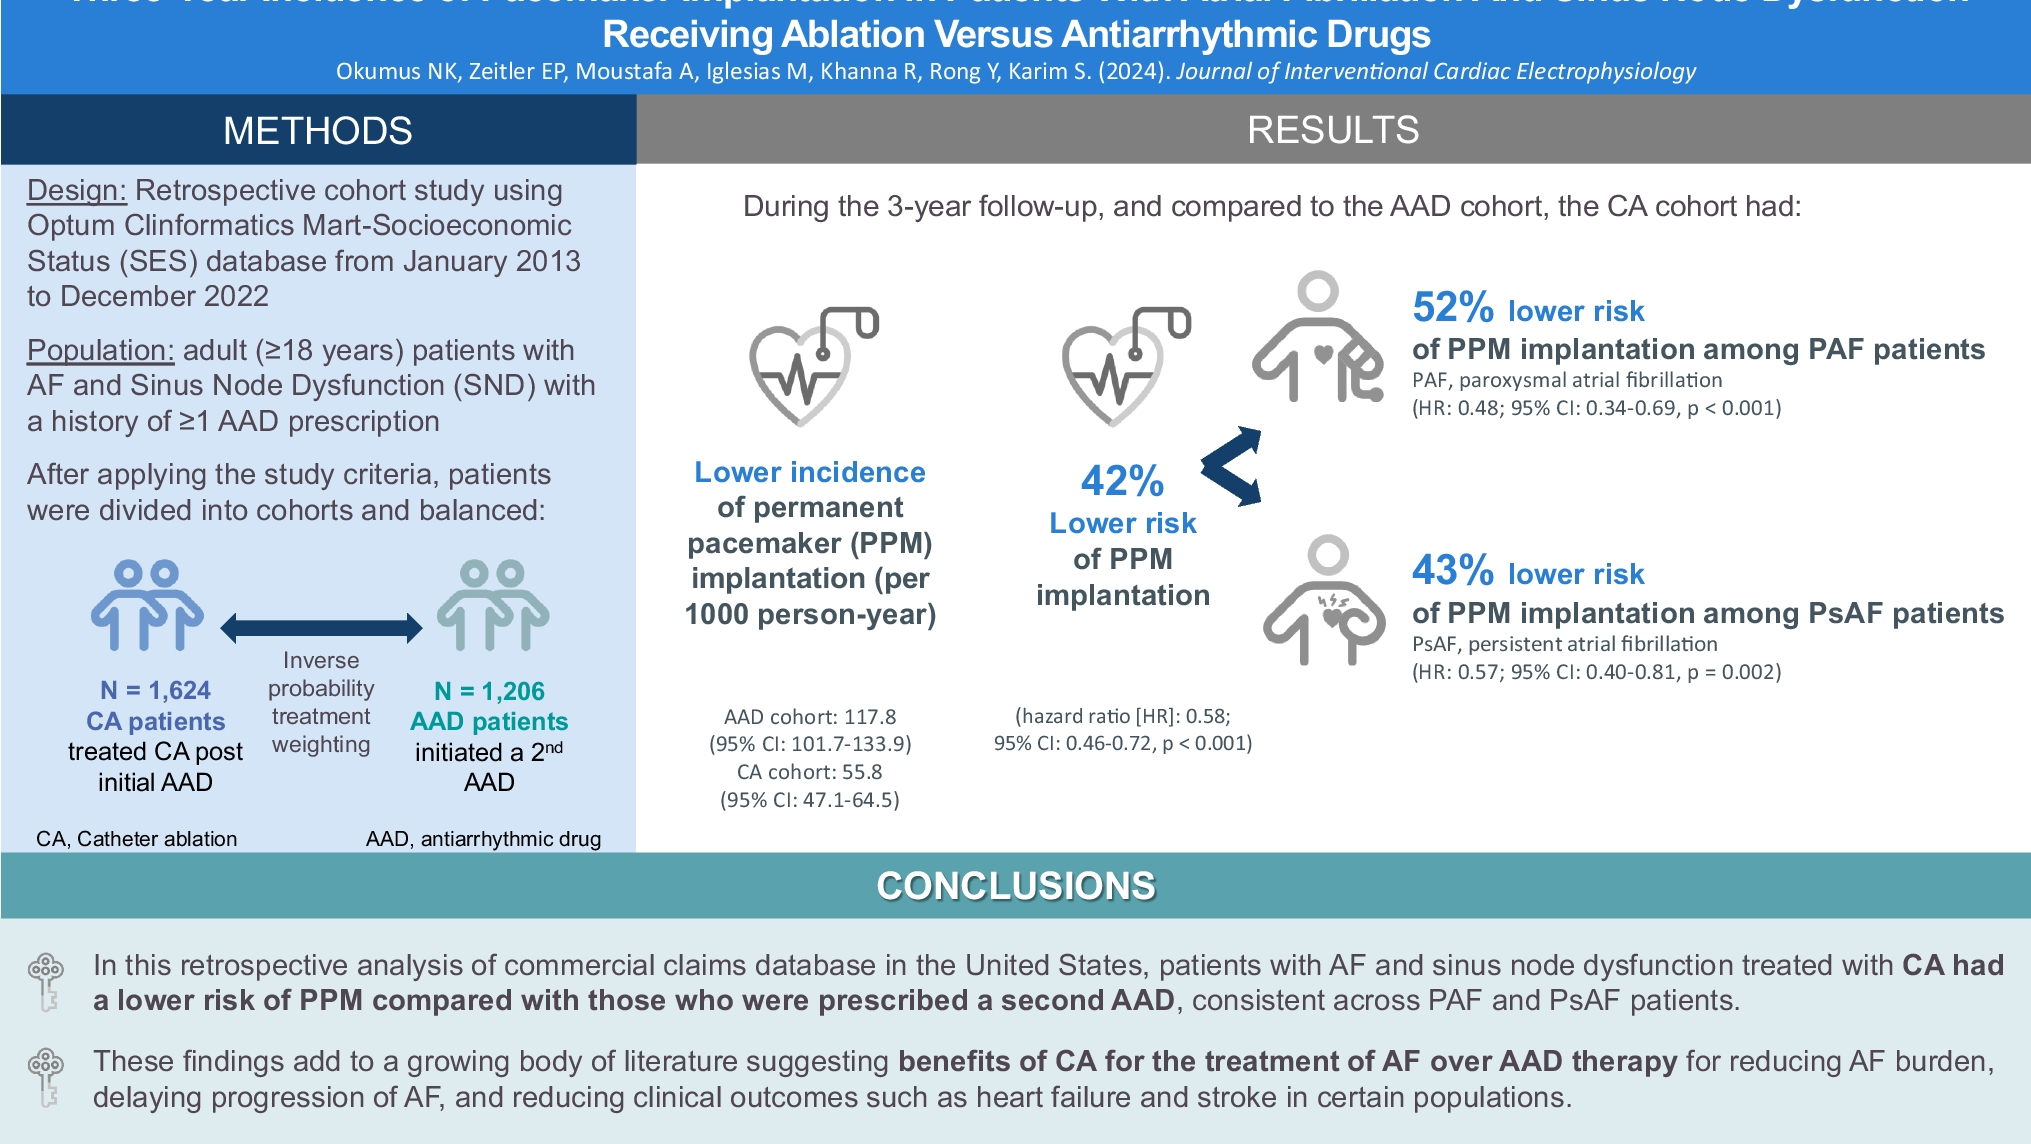 Three-year incidence of pacemaker implantation in patients with atrial fibrillation and sinus node dysfunction receiving ablation versus antiarrhythmic drugs